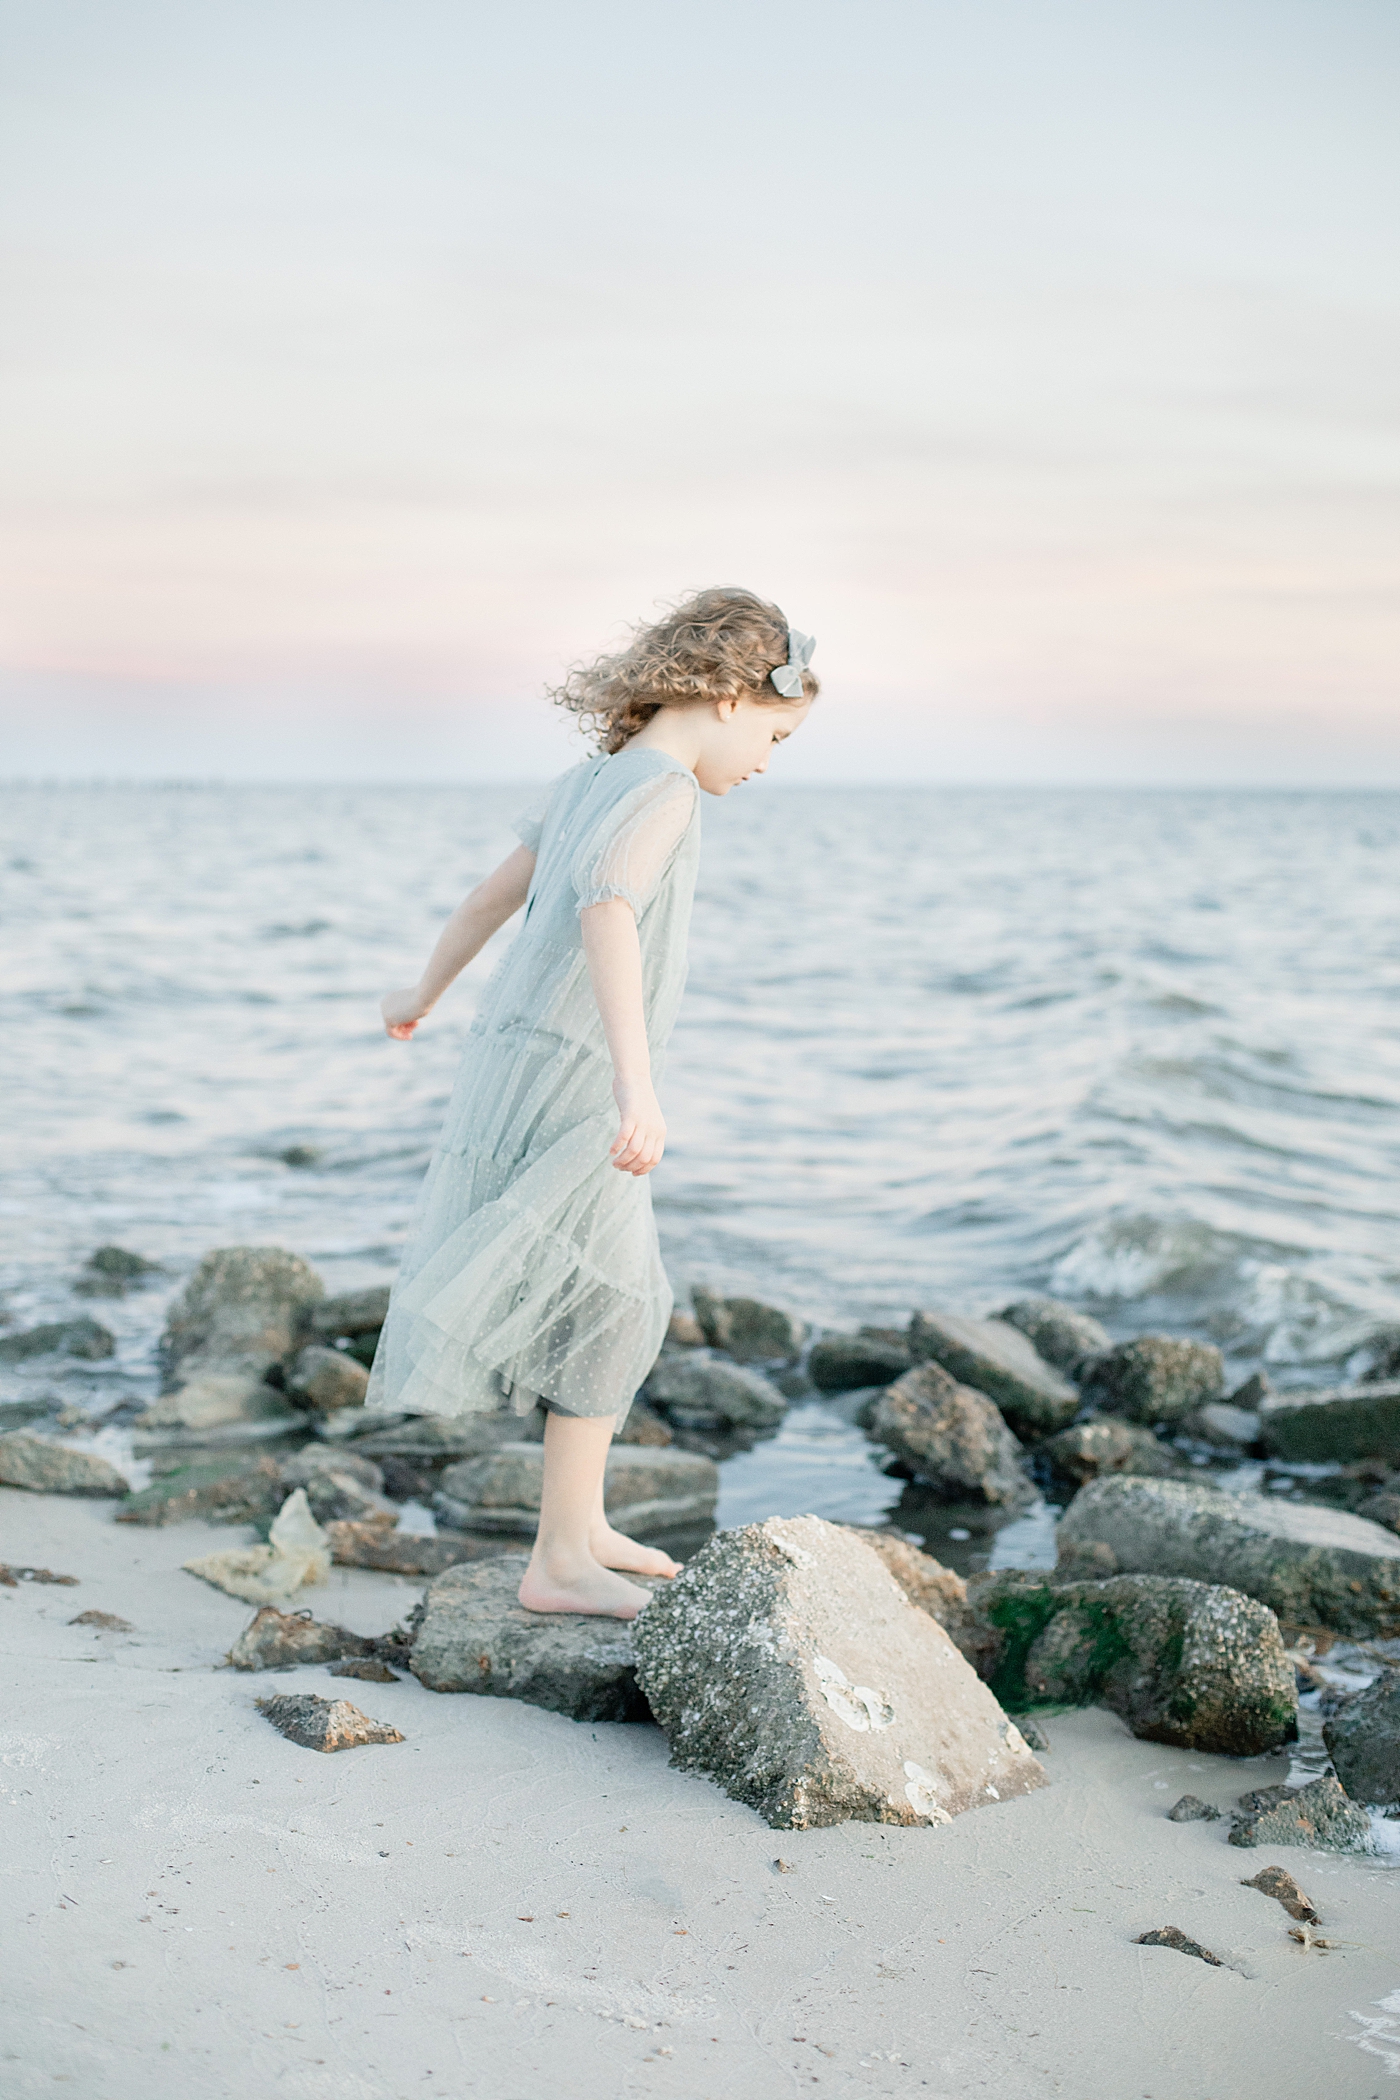 Little girl in gray dress walking on rocks at the beach | Photo by Little Sunshine Photography